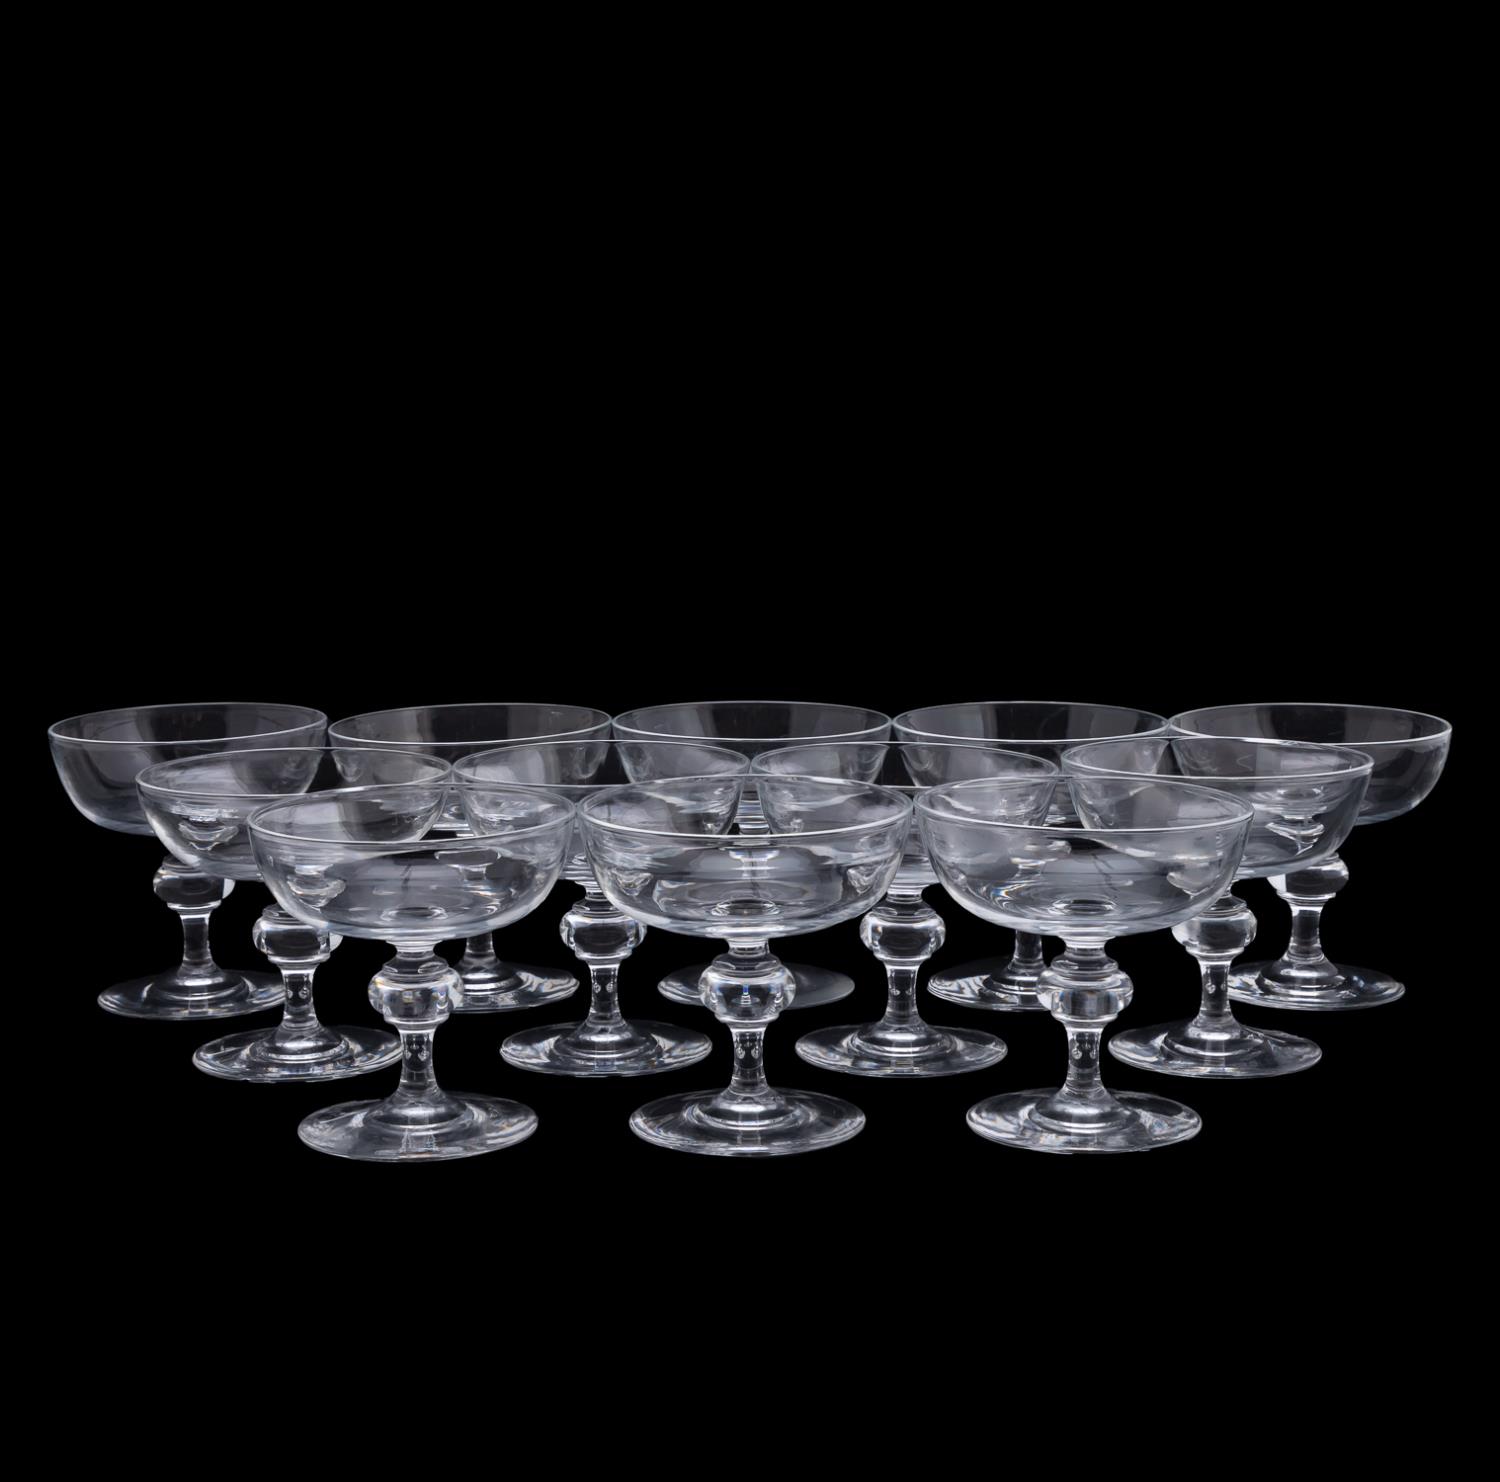 SET OF 12 STEUBEN CHAMPAGNE COUPES,